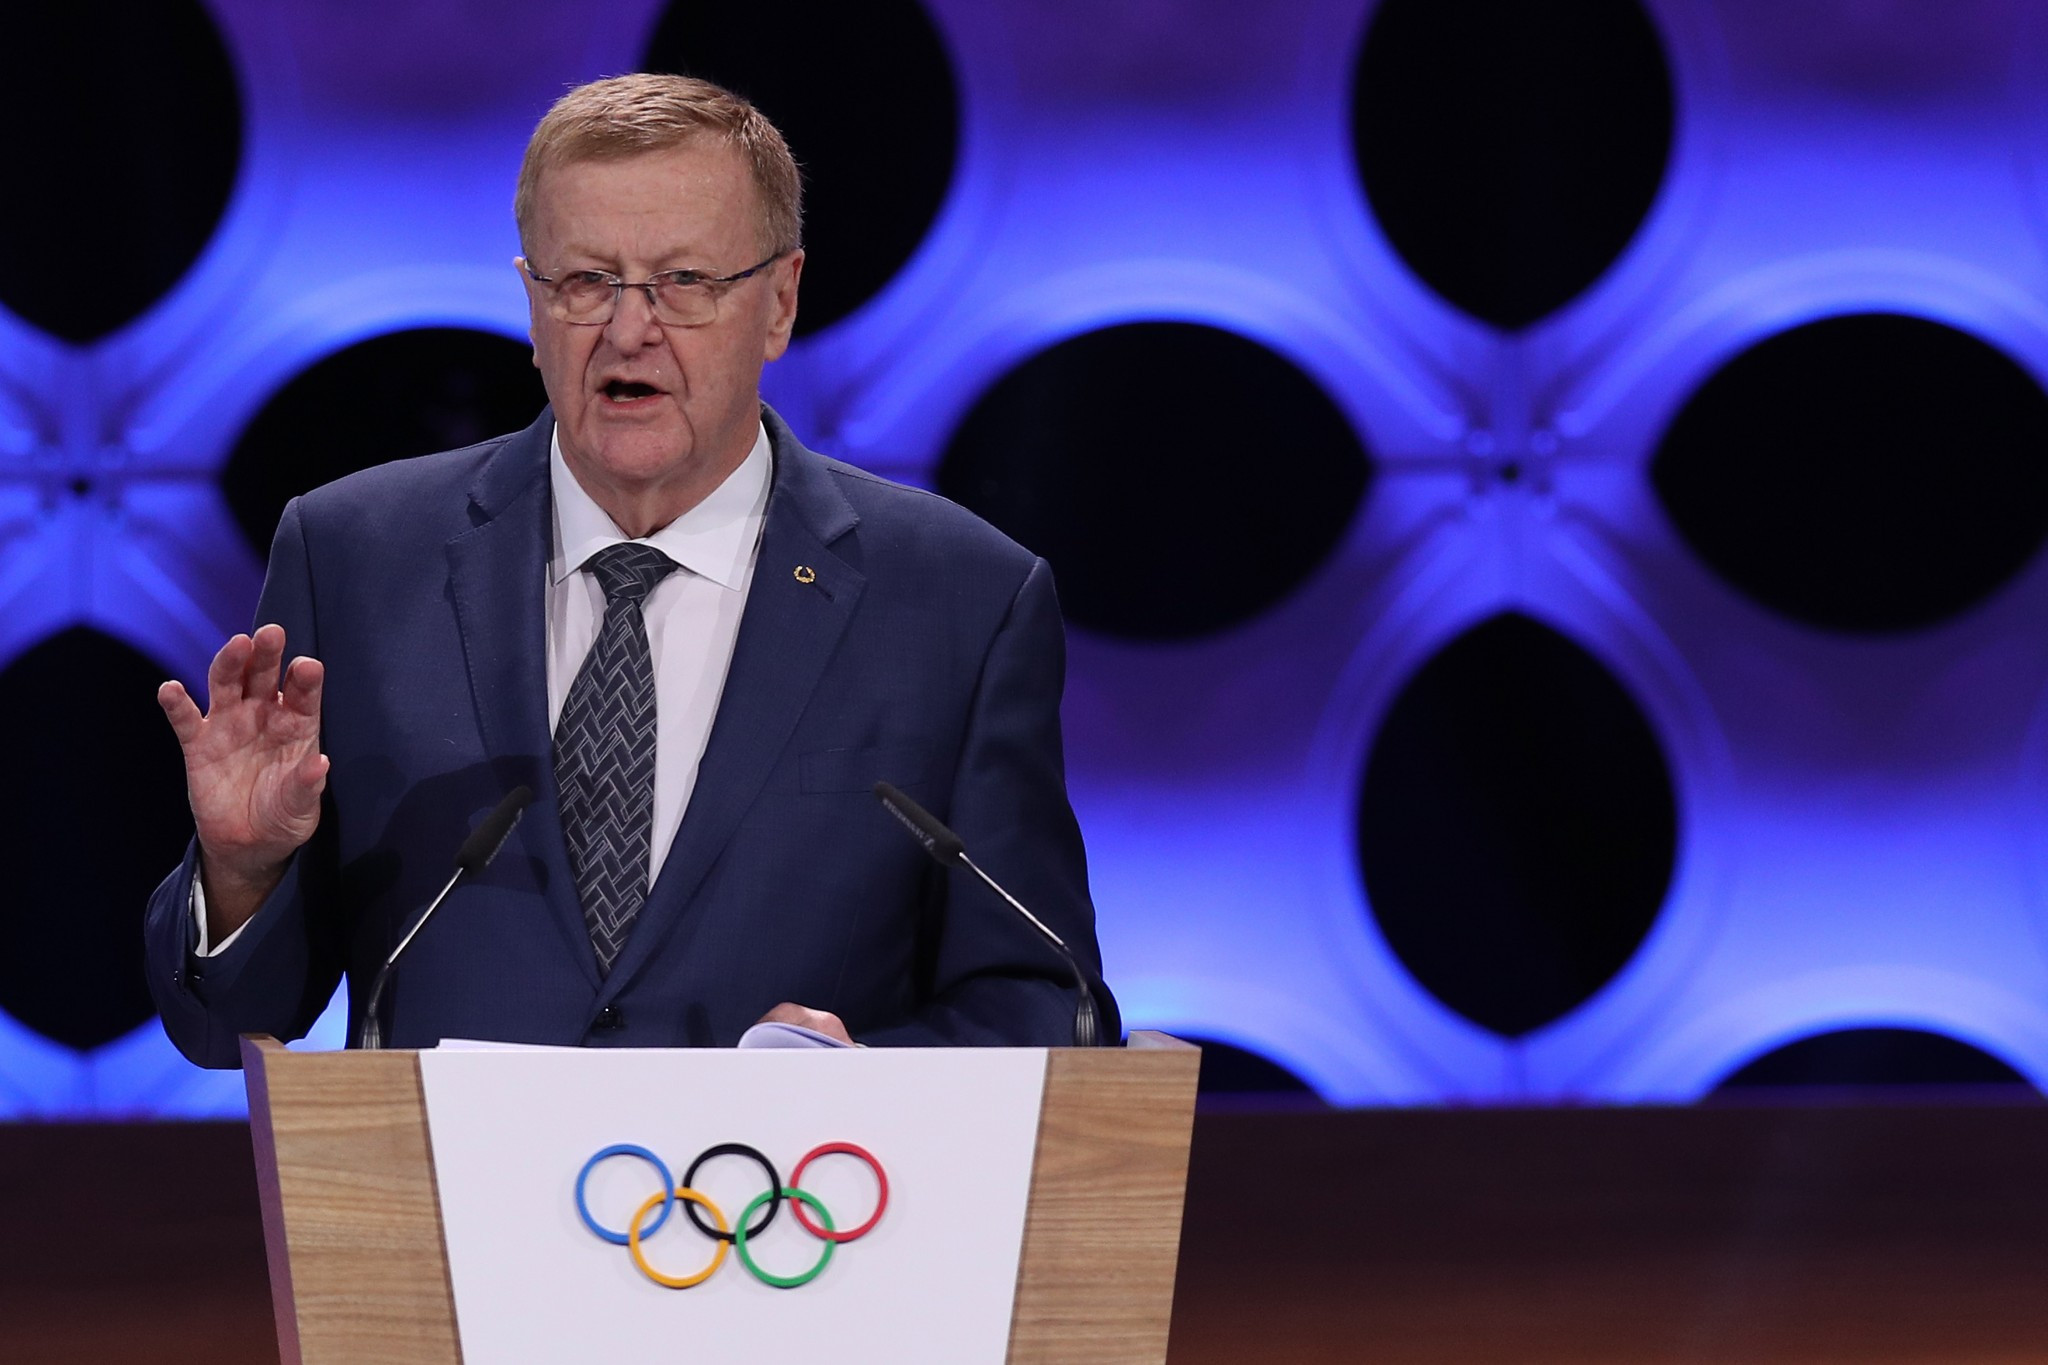 IOC vice-president John Coates revealed the record sponsorship revenue achieved by Tokyo 2020 ©Getty Images